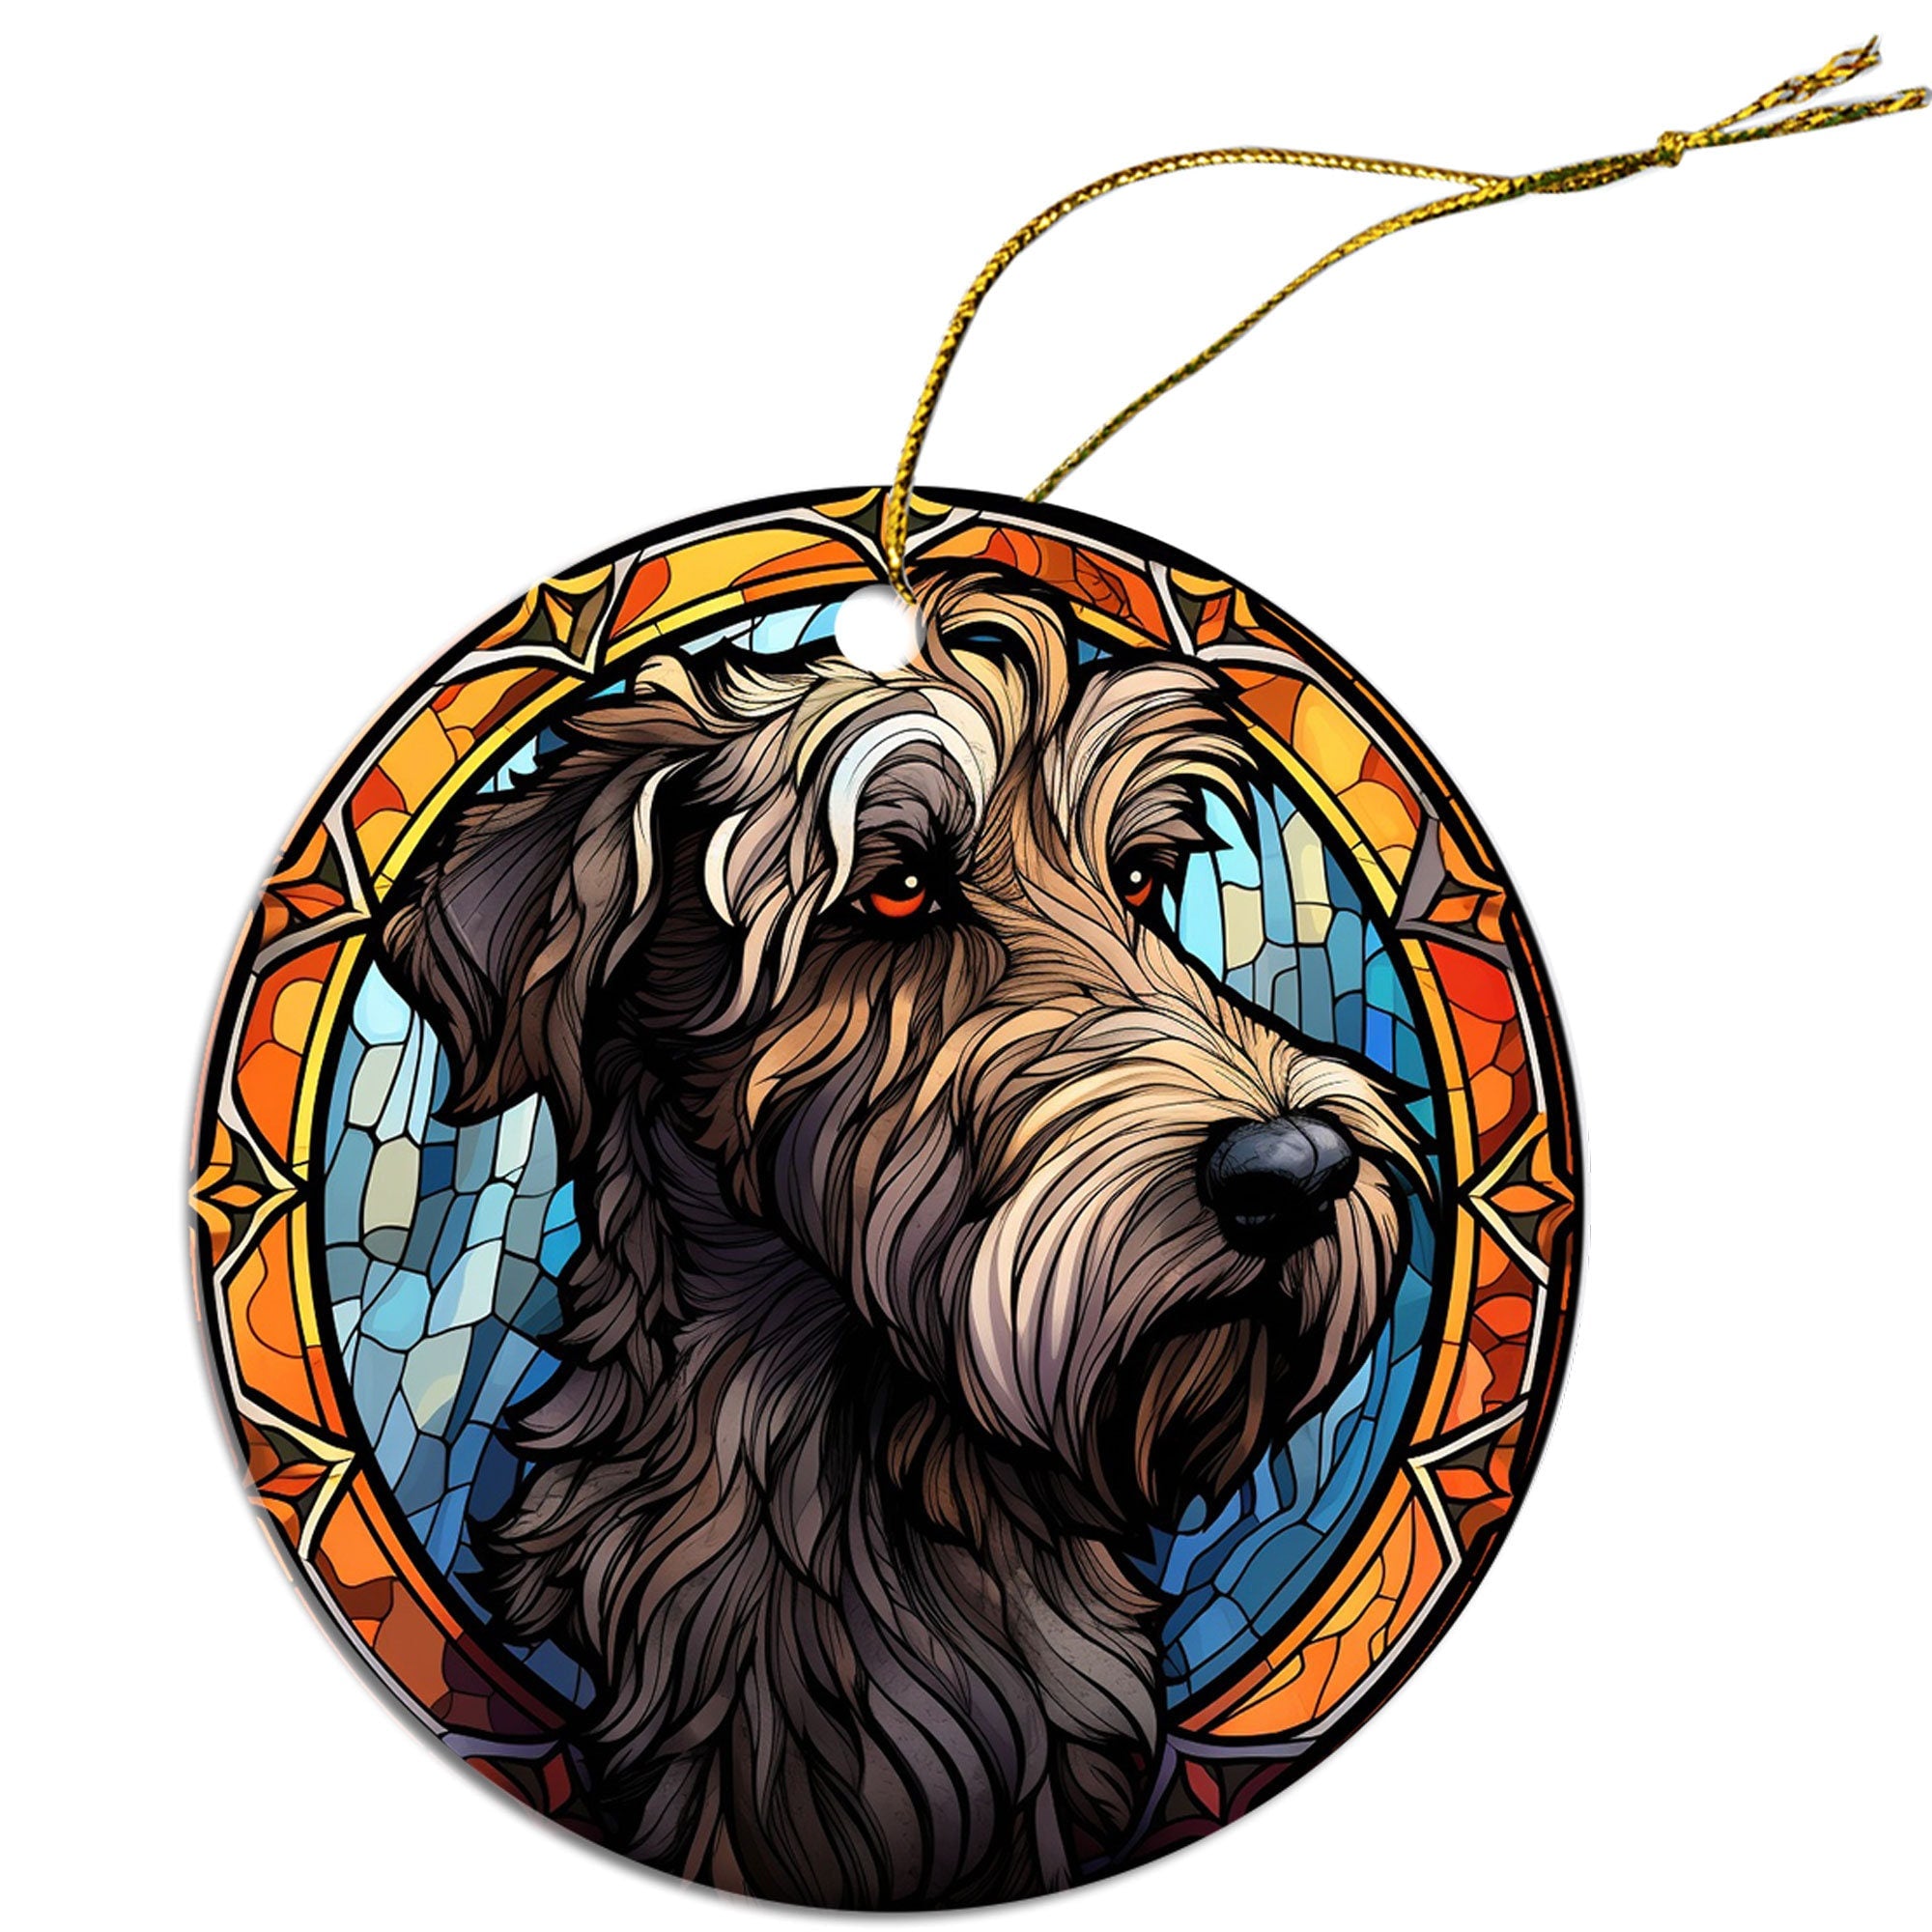 Dog Breed Christmas Ornament Stained Glass Style, "Irish Wolfhound"